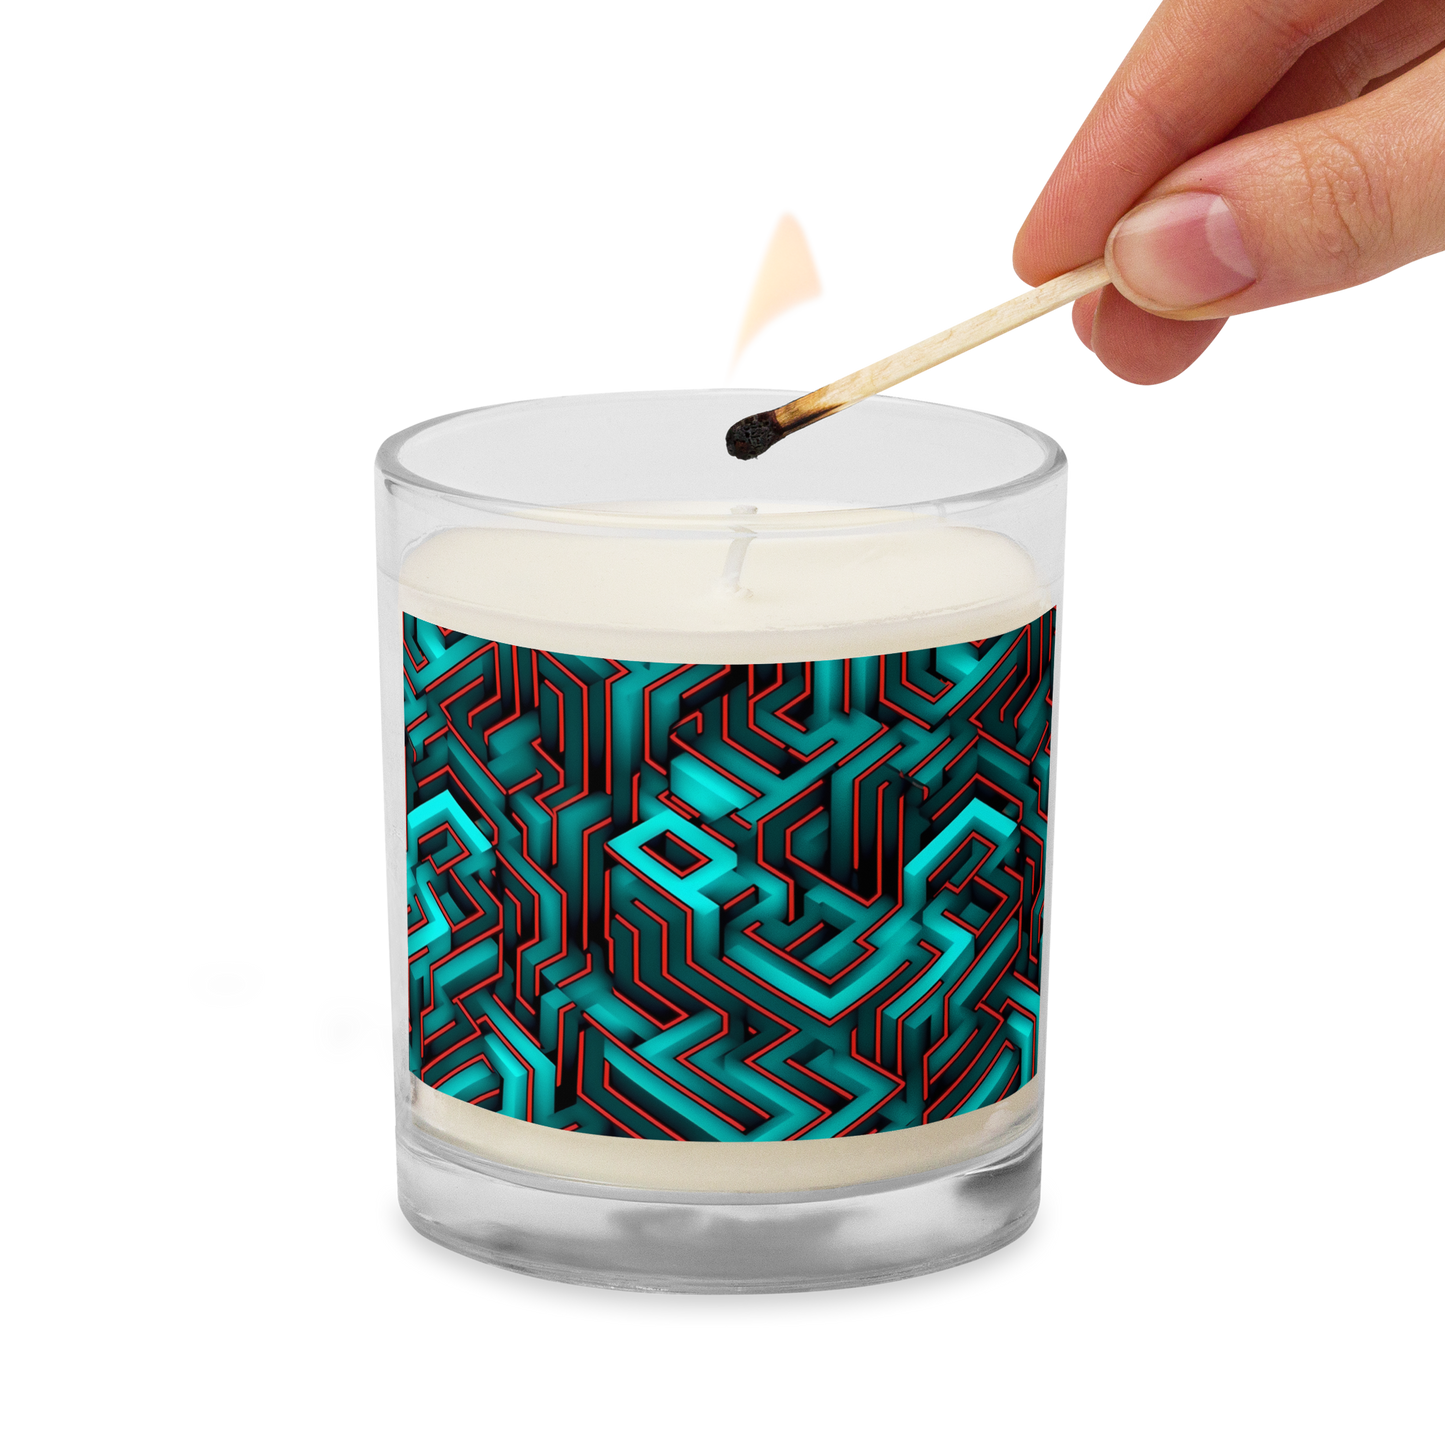 3D Maze Illusion | 3D Patterns | Glass Jar Soy Wax Candle - #2